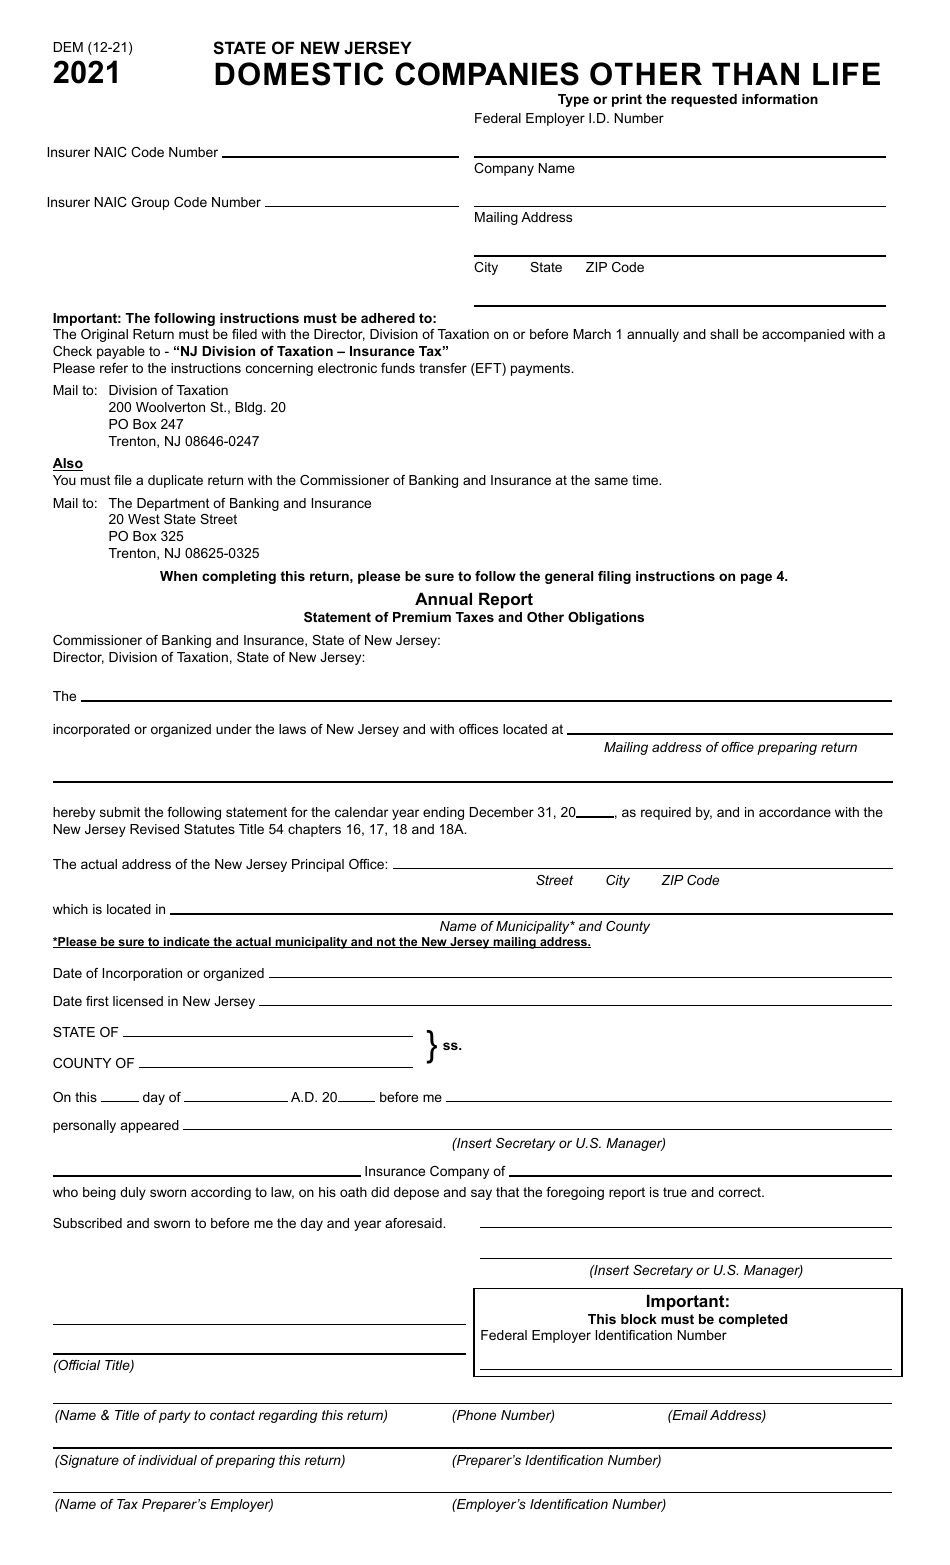 Form DEM Domestic Companies Other Than Life - New Jersey, Page 1